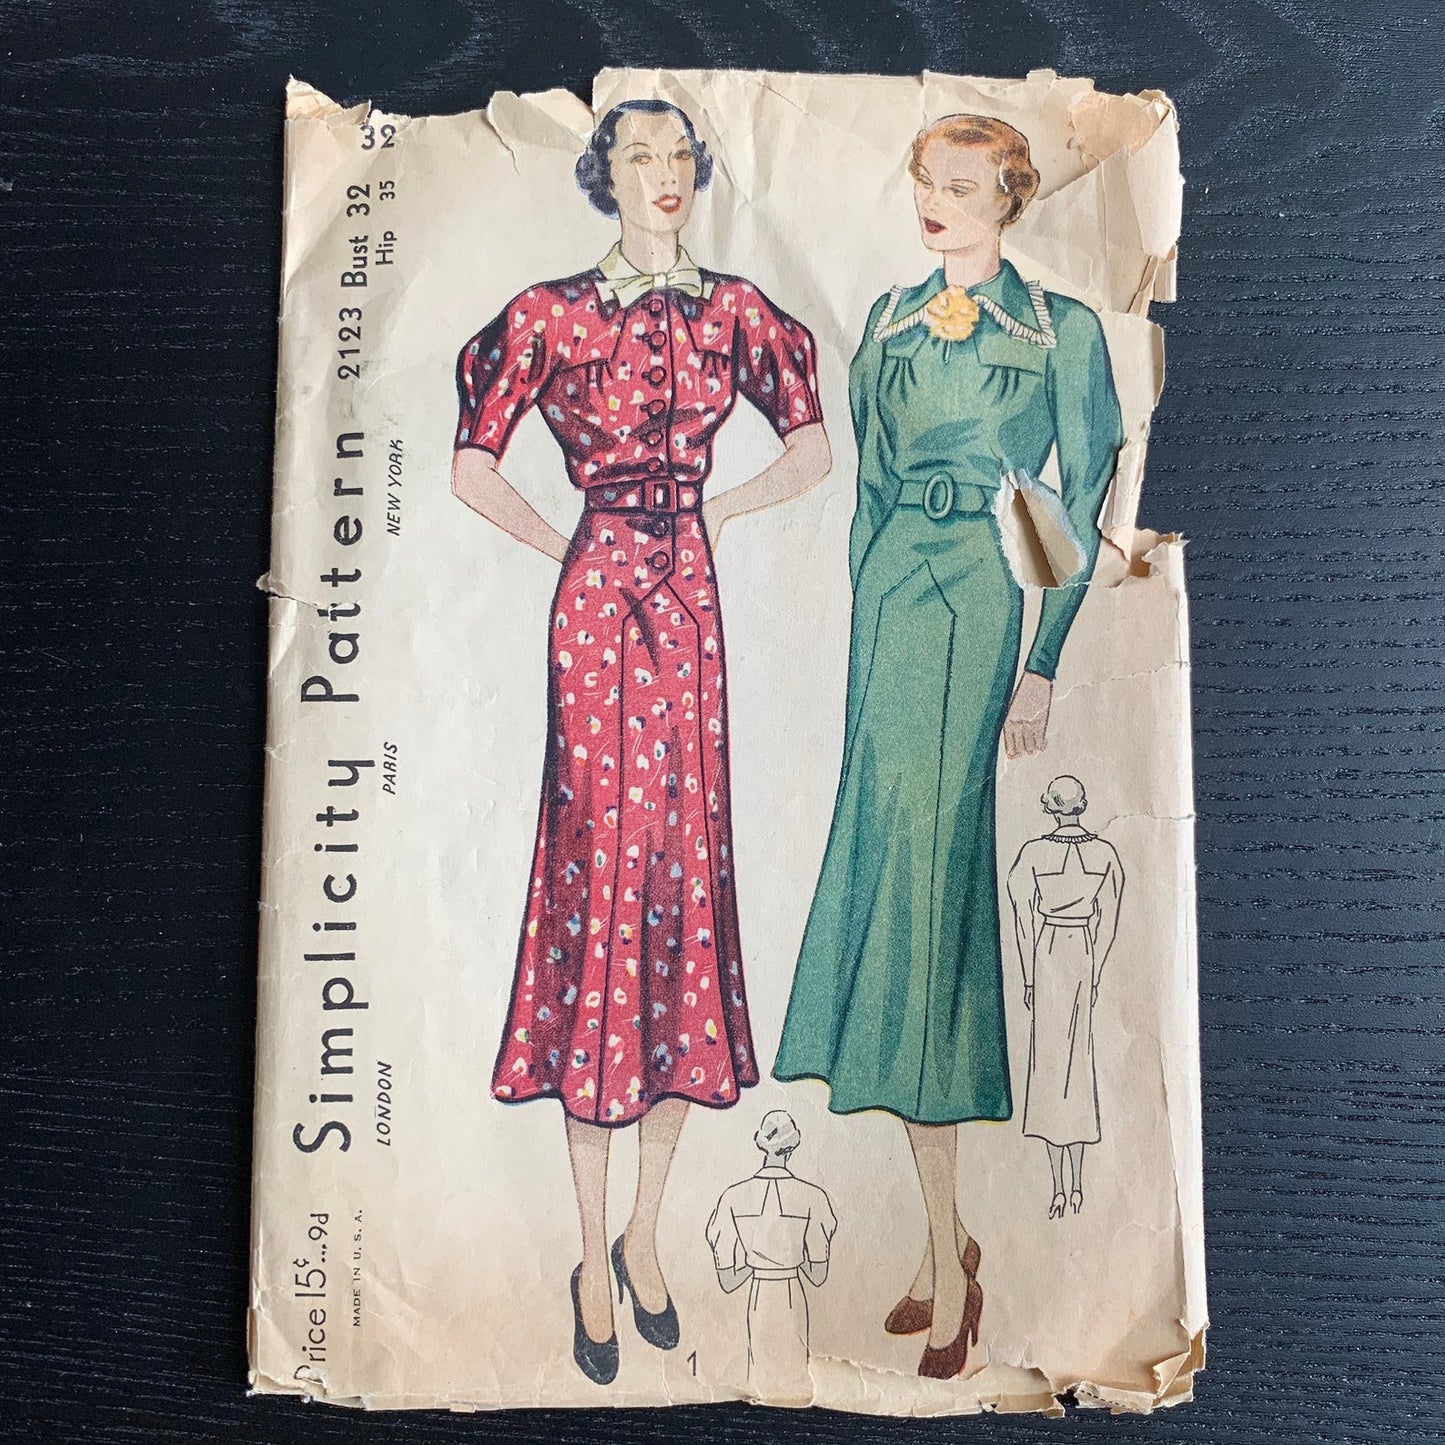 1930s Womens Dress Sewing Pattern Simplicity 2123, Vintage 30s Pattern, Long or Short Sleeves, Bust 32", Incomplete Missing One Collar Style